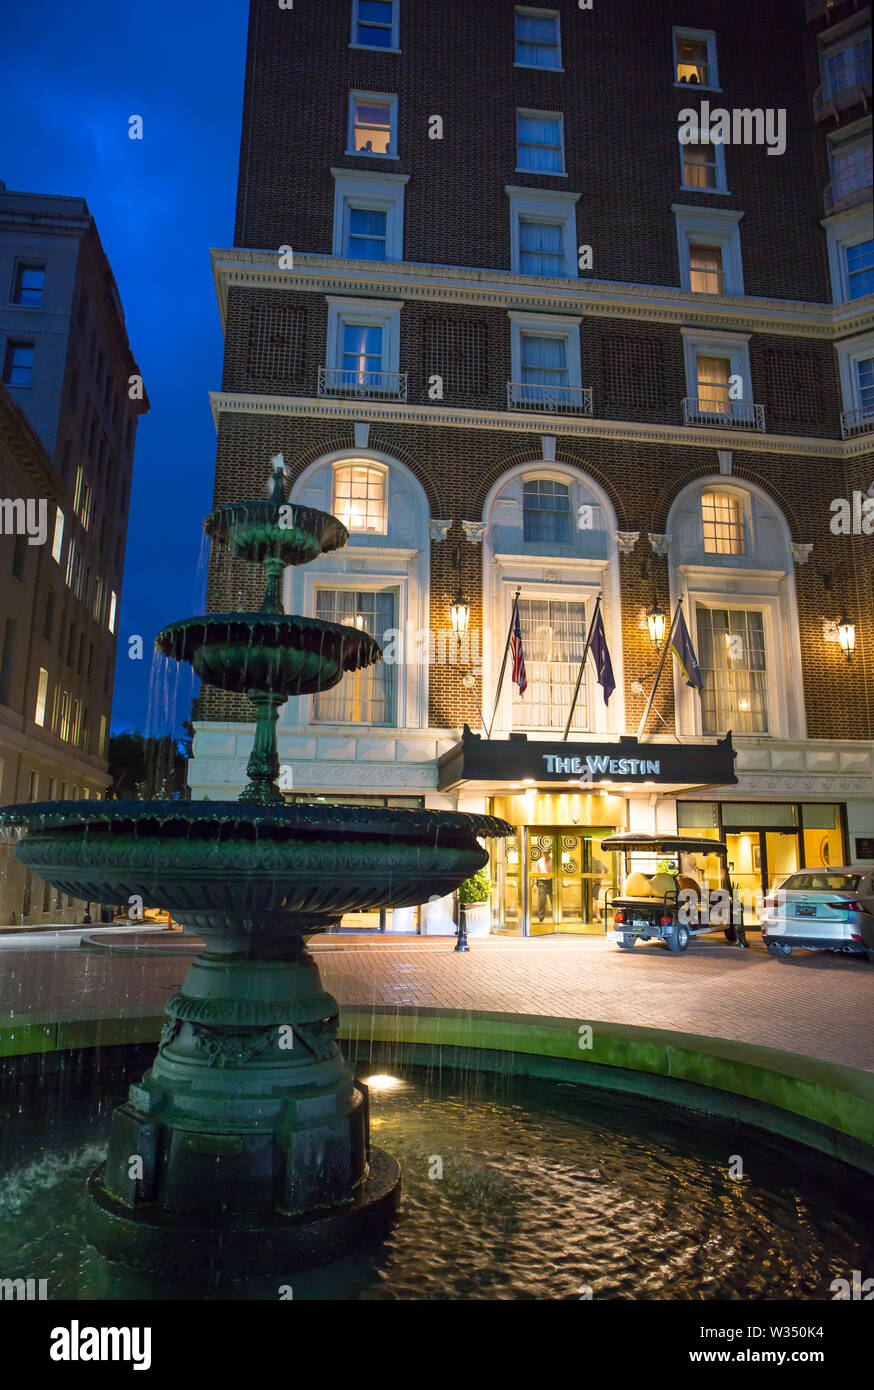 GREENVILLE, SC (USA) - July 5, 2019:  An after-dark view of the downtown Westin hotel with a fountain in the foreground. Stock Photo